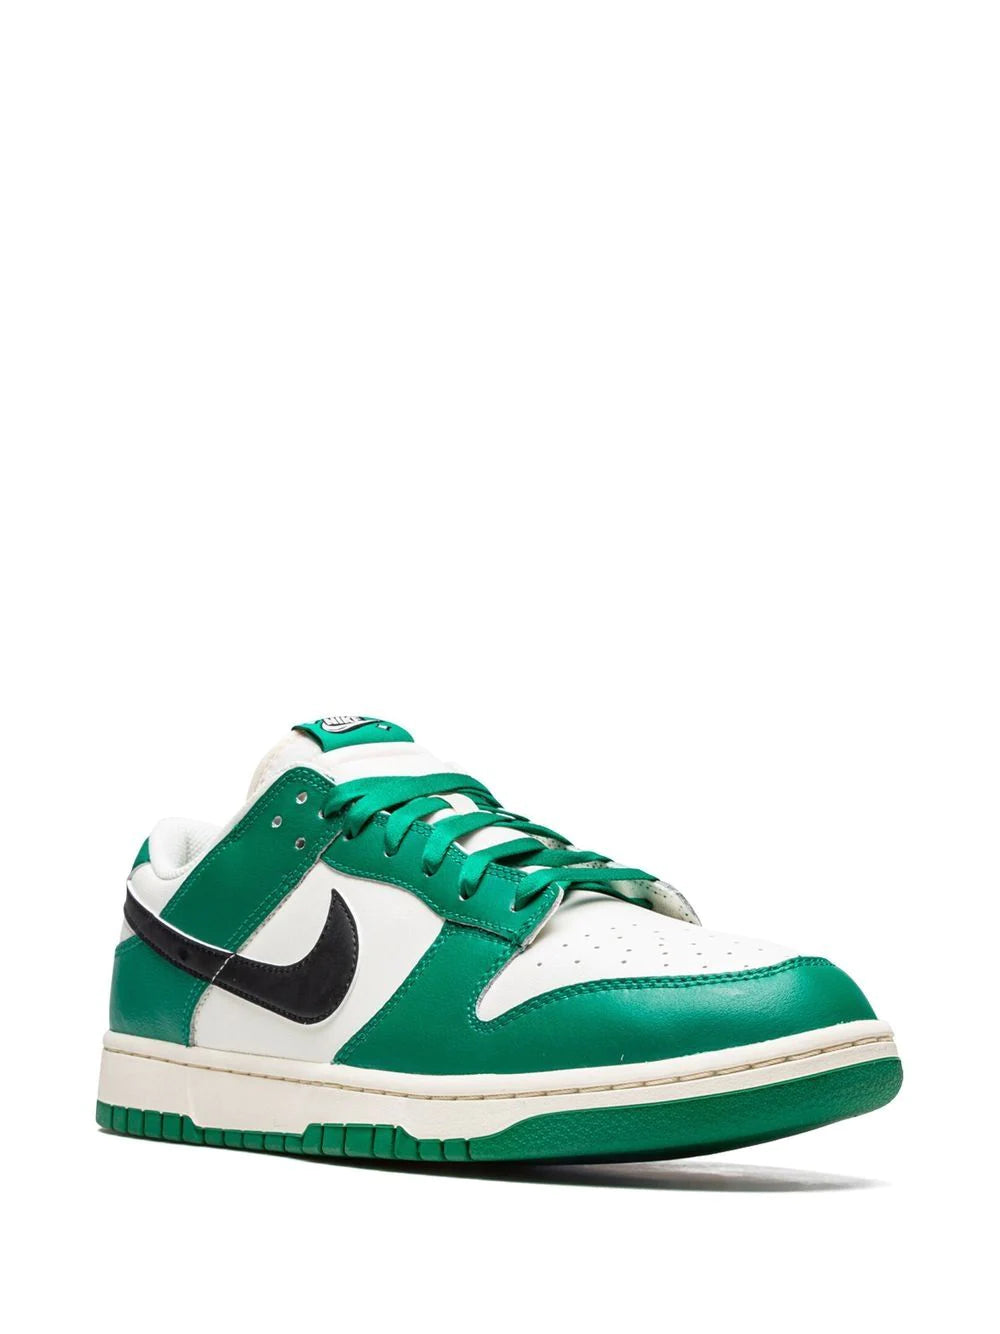 Nike Dunk Low Retro SE "Lottery Pack - Green"